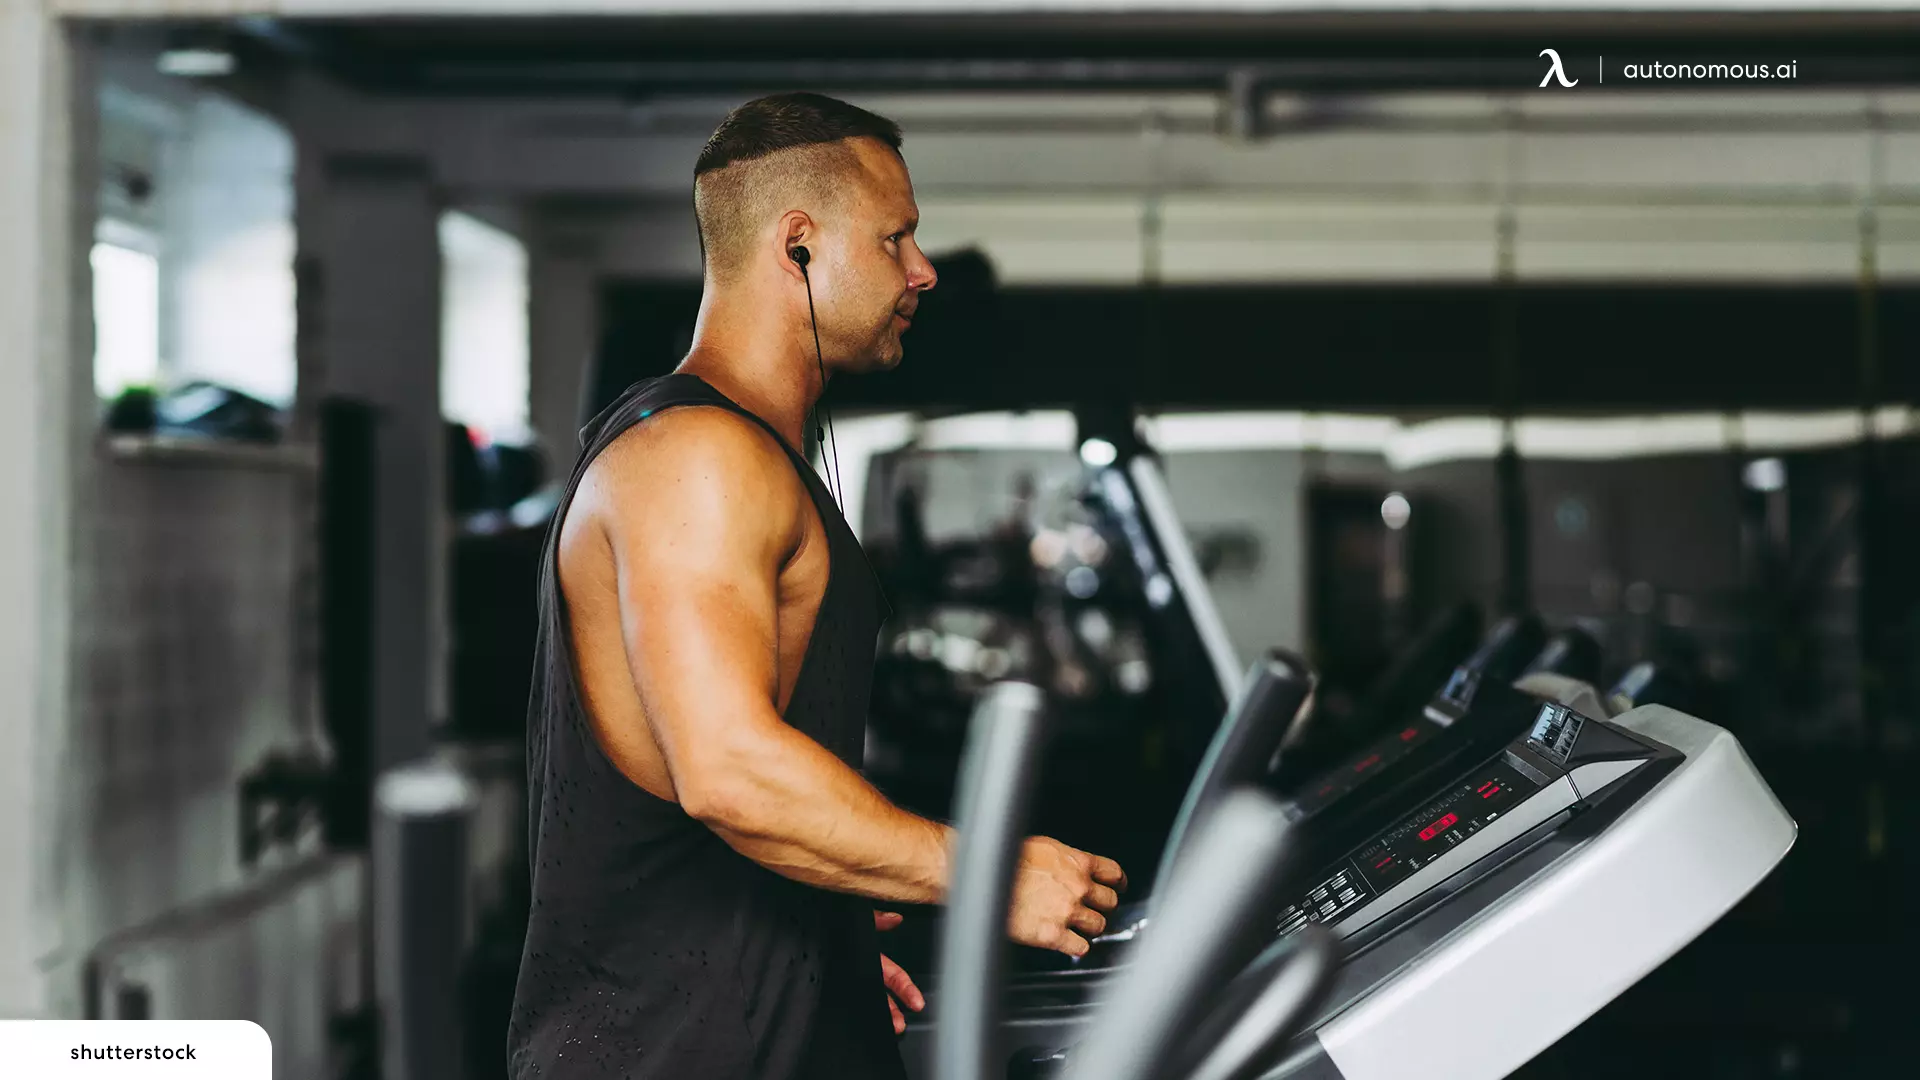 Pros and Cons of Manual Treadmill